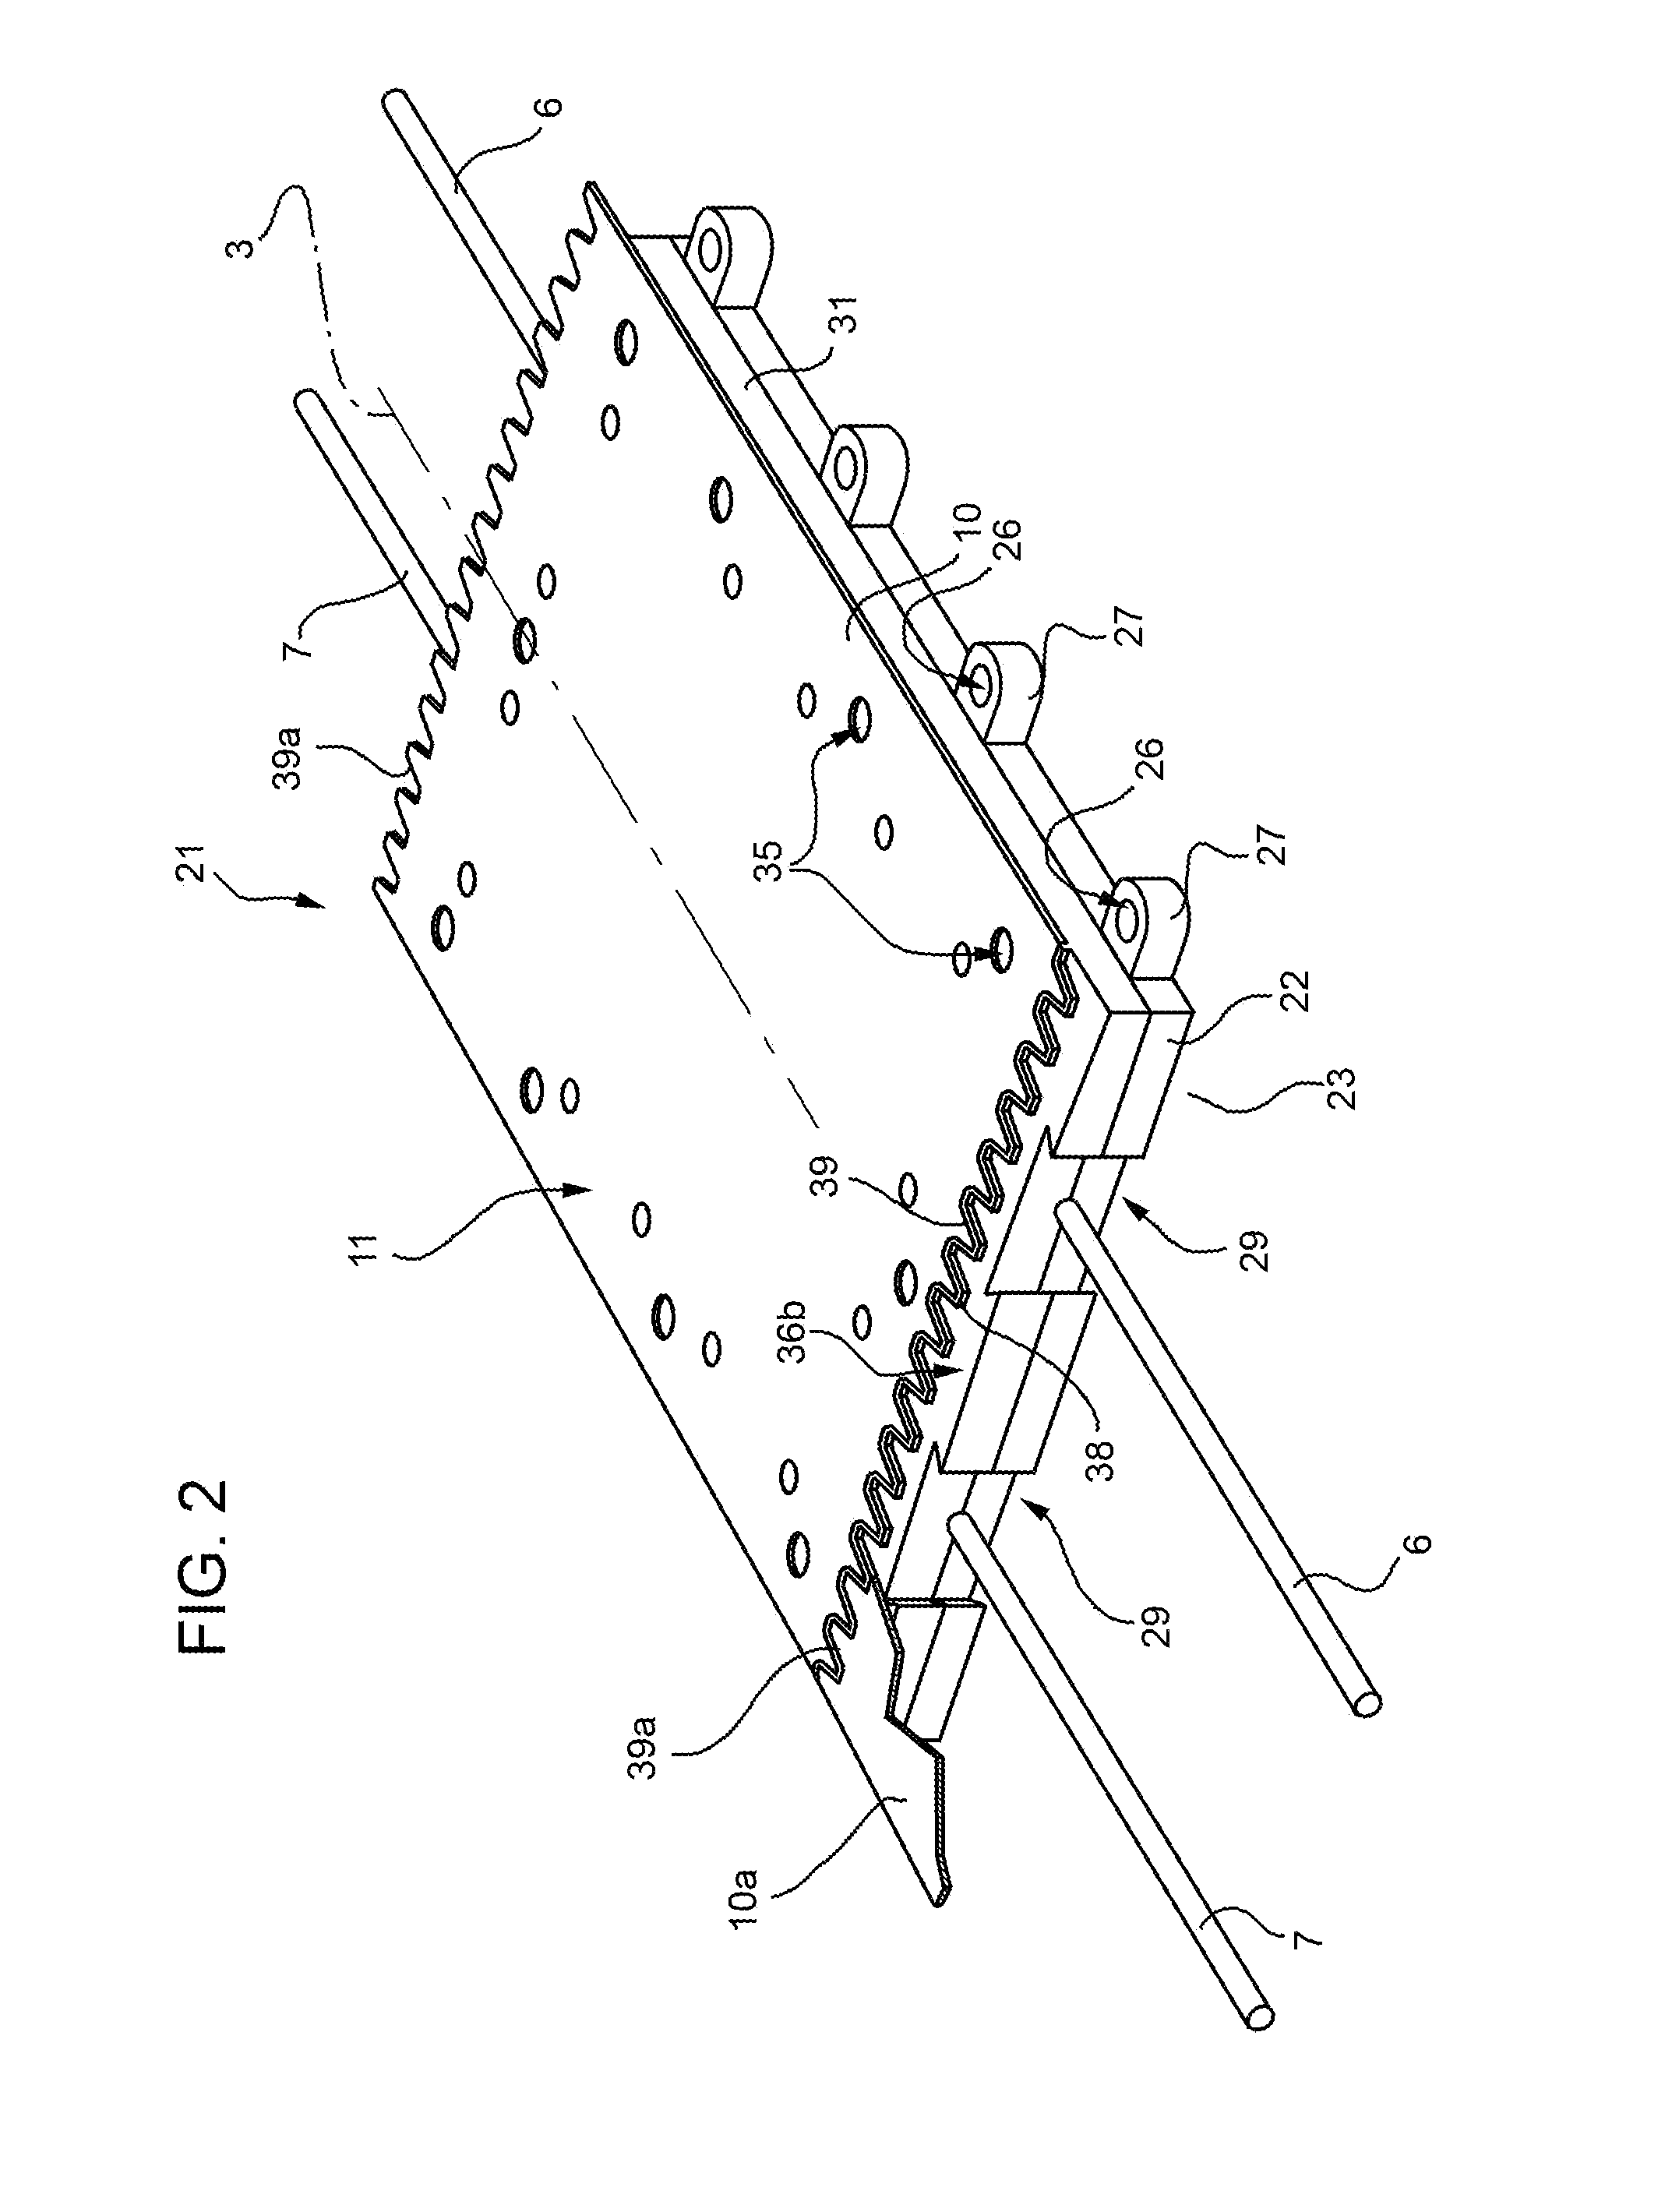 Tile for forming a ground power supply line